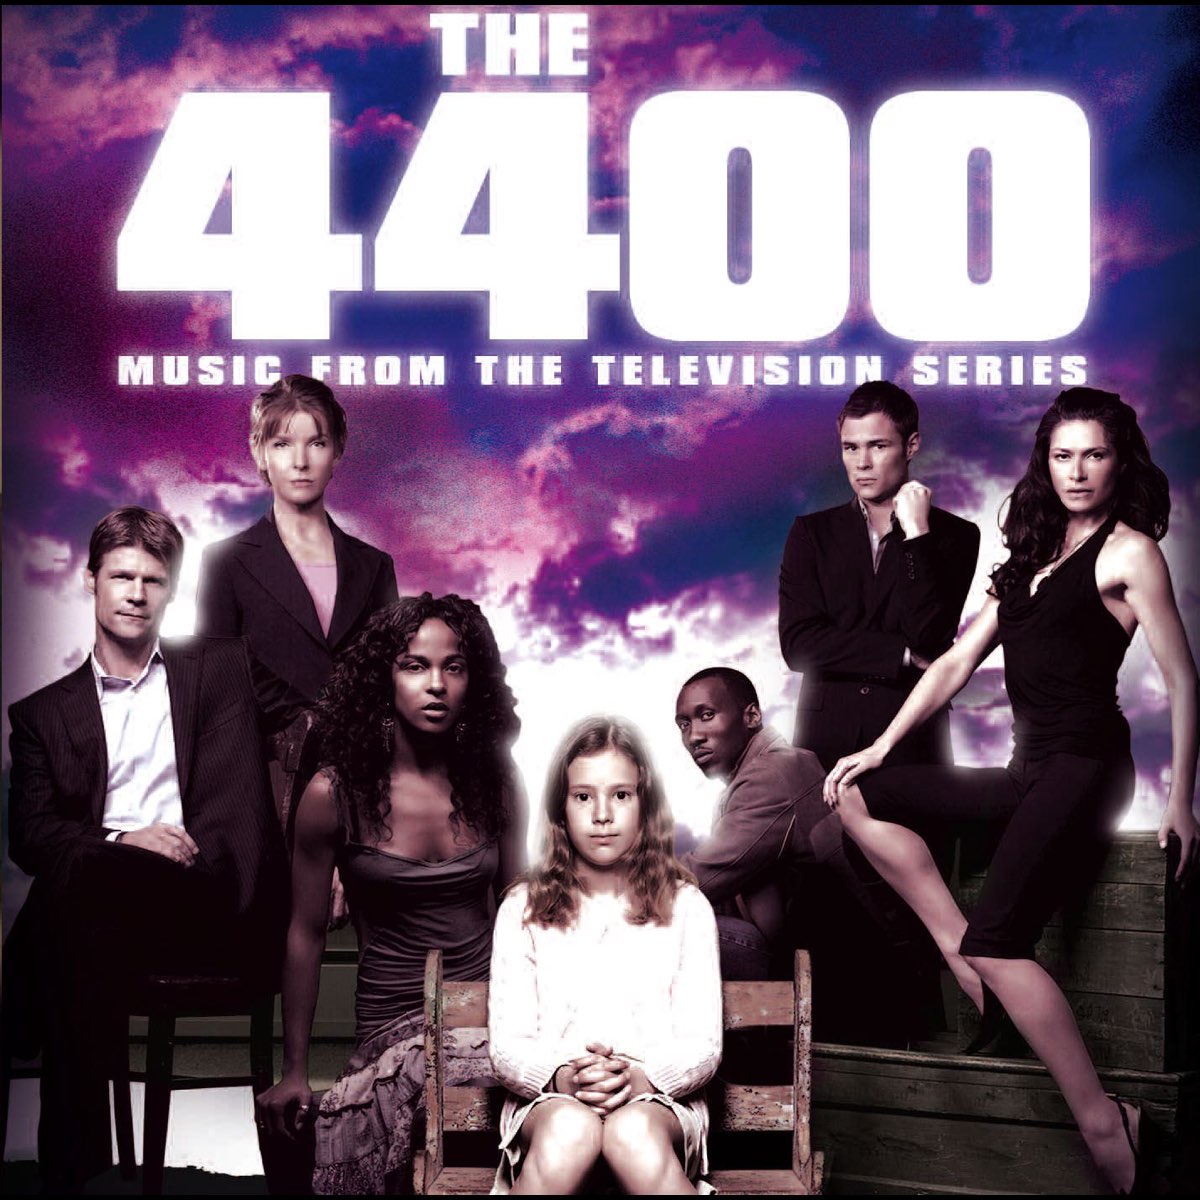 Various Artistsの The 4400 Music From The Television Series をapple Musicで